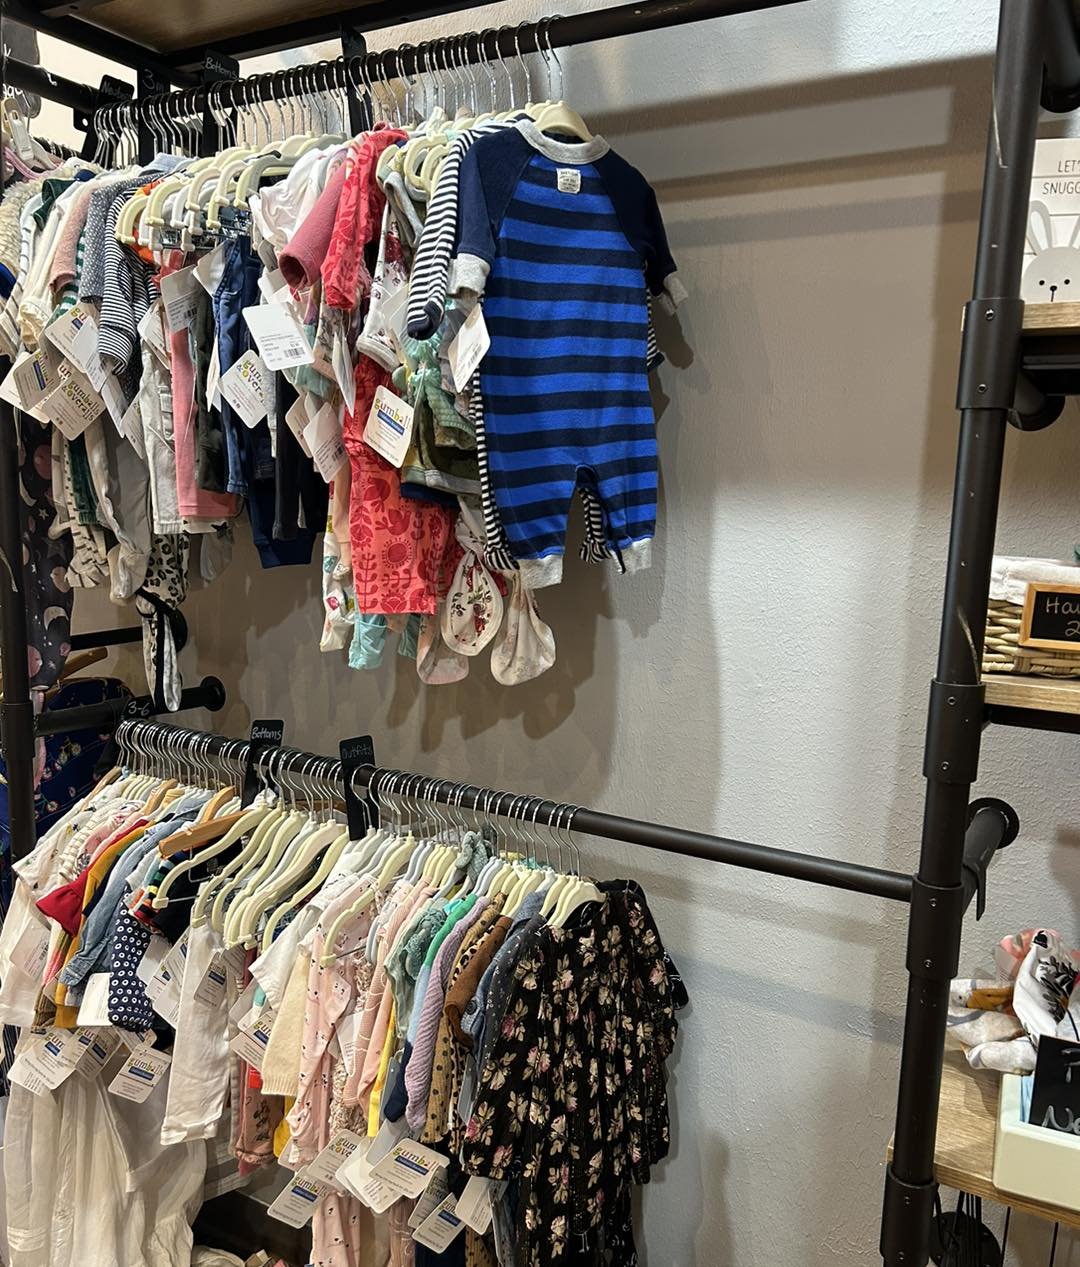 Well that&rsquo;s weird! There&rsquo;s a lot of space on our 0-6 Month racks. Usually infant is jam packed, but it&rsquo;s been flying out the door!

If you have baby clothes to offload, we are in need. Just walk in with your bin or bags, and get ins